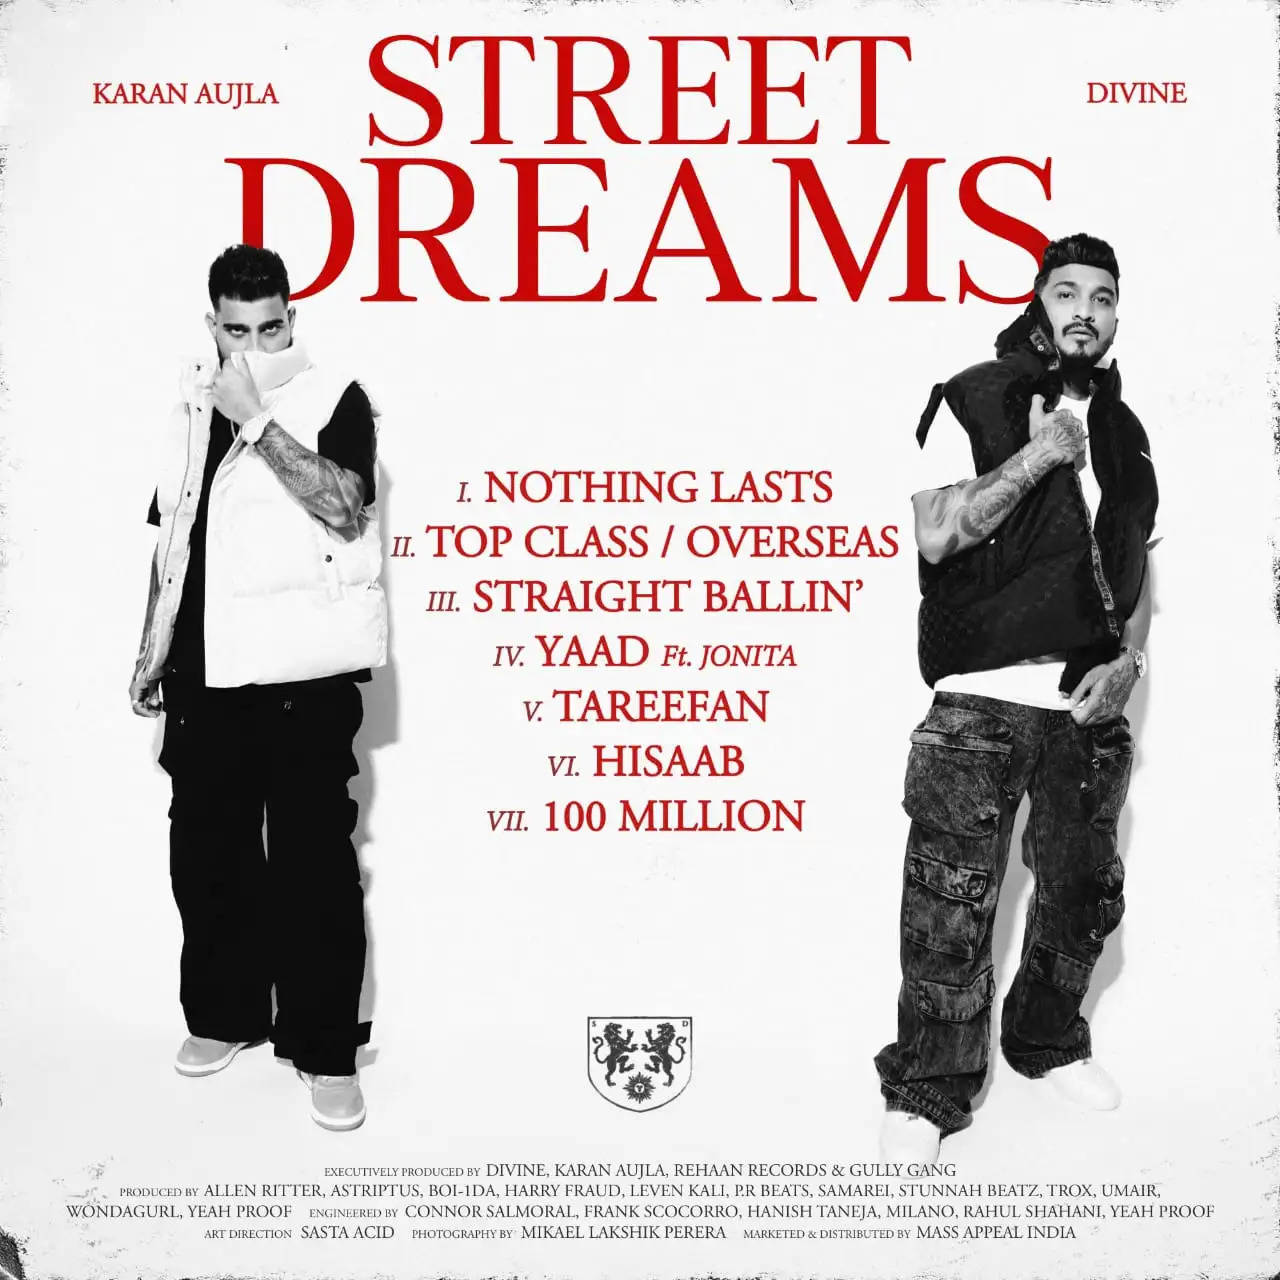 Big Announcement! Hip-hop icons DIVINE and Karan Aujla unveil the title of their new album ‘Street Dreams’, Set to drop at midnight today